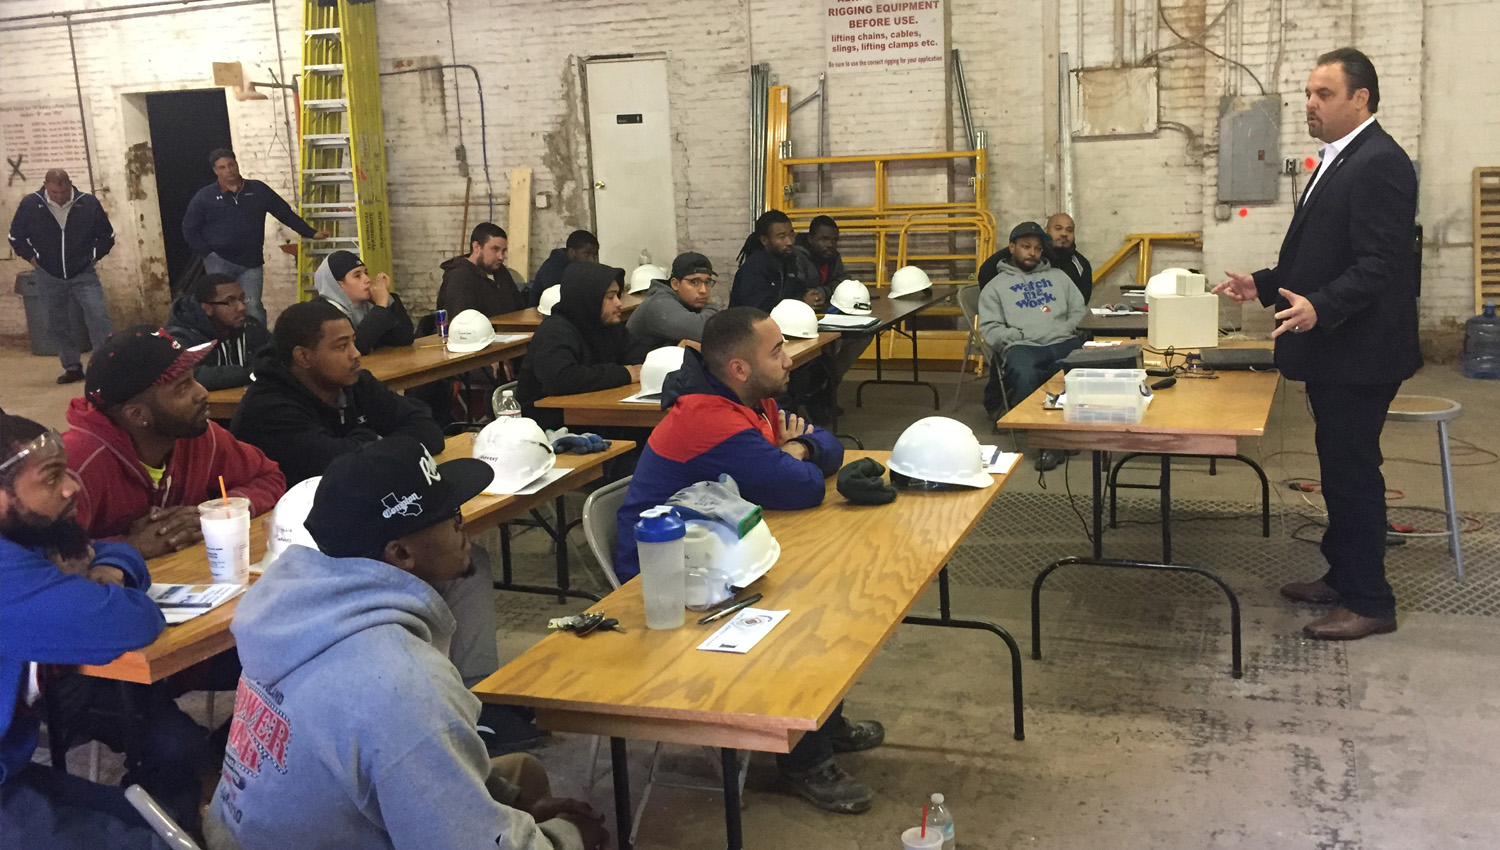 A man wearing a suit addresses a room full of apprentices. They sit at folding tables with their hard hats and other work gear.